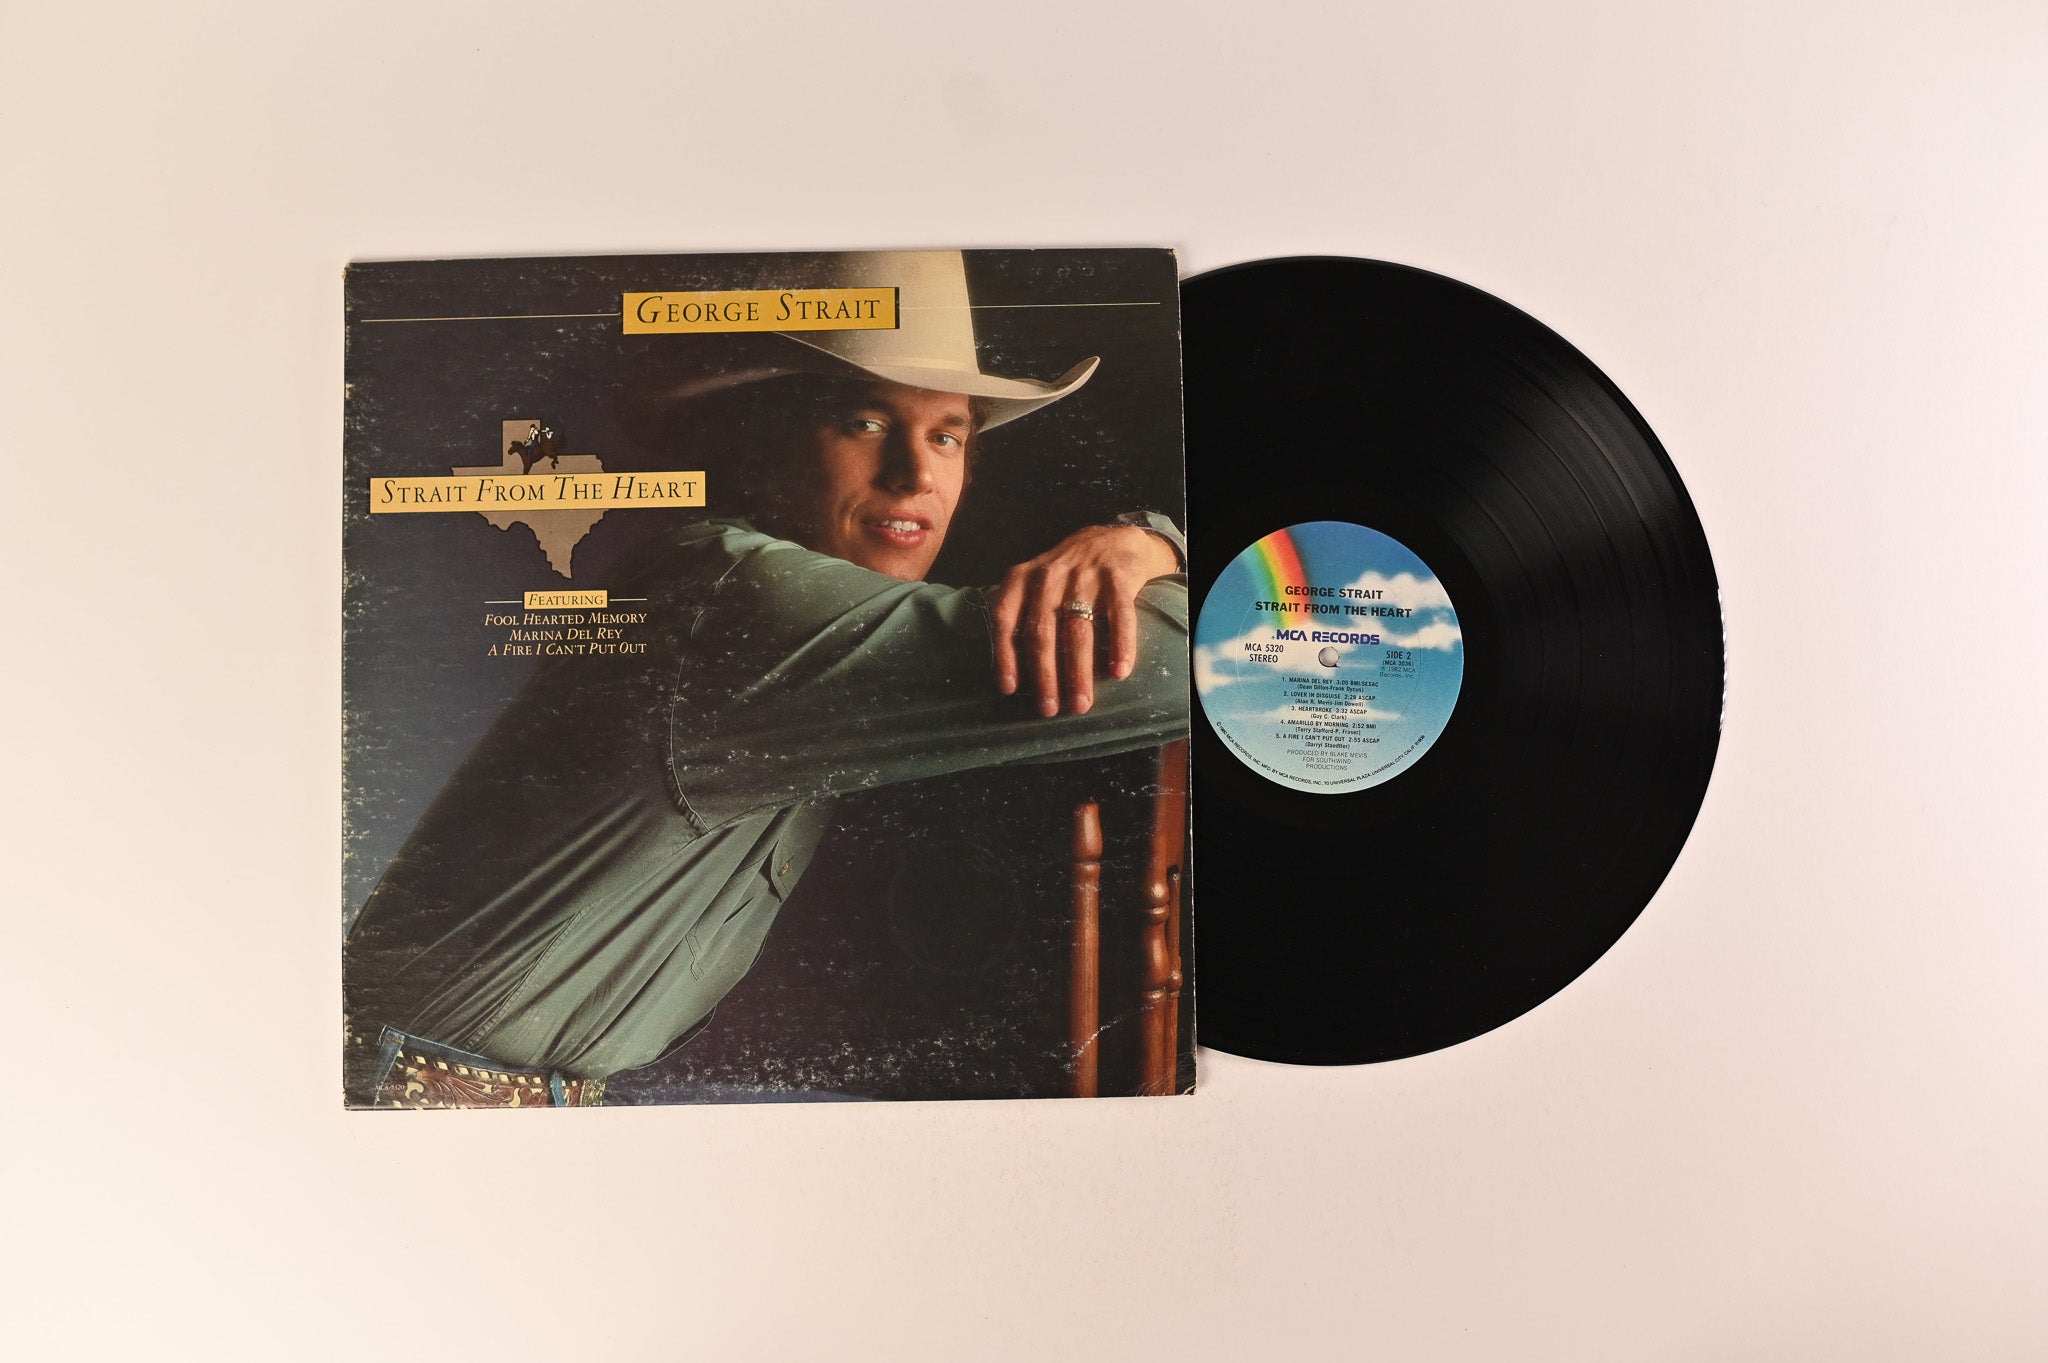 George Strait - Strait From The Heart on MCA Records